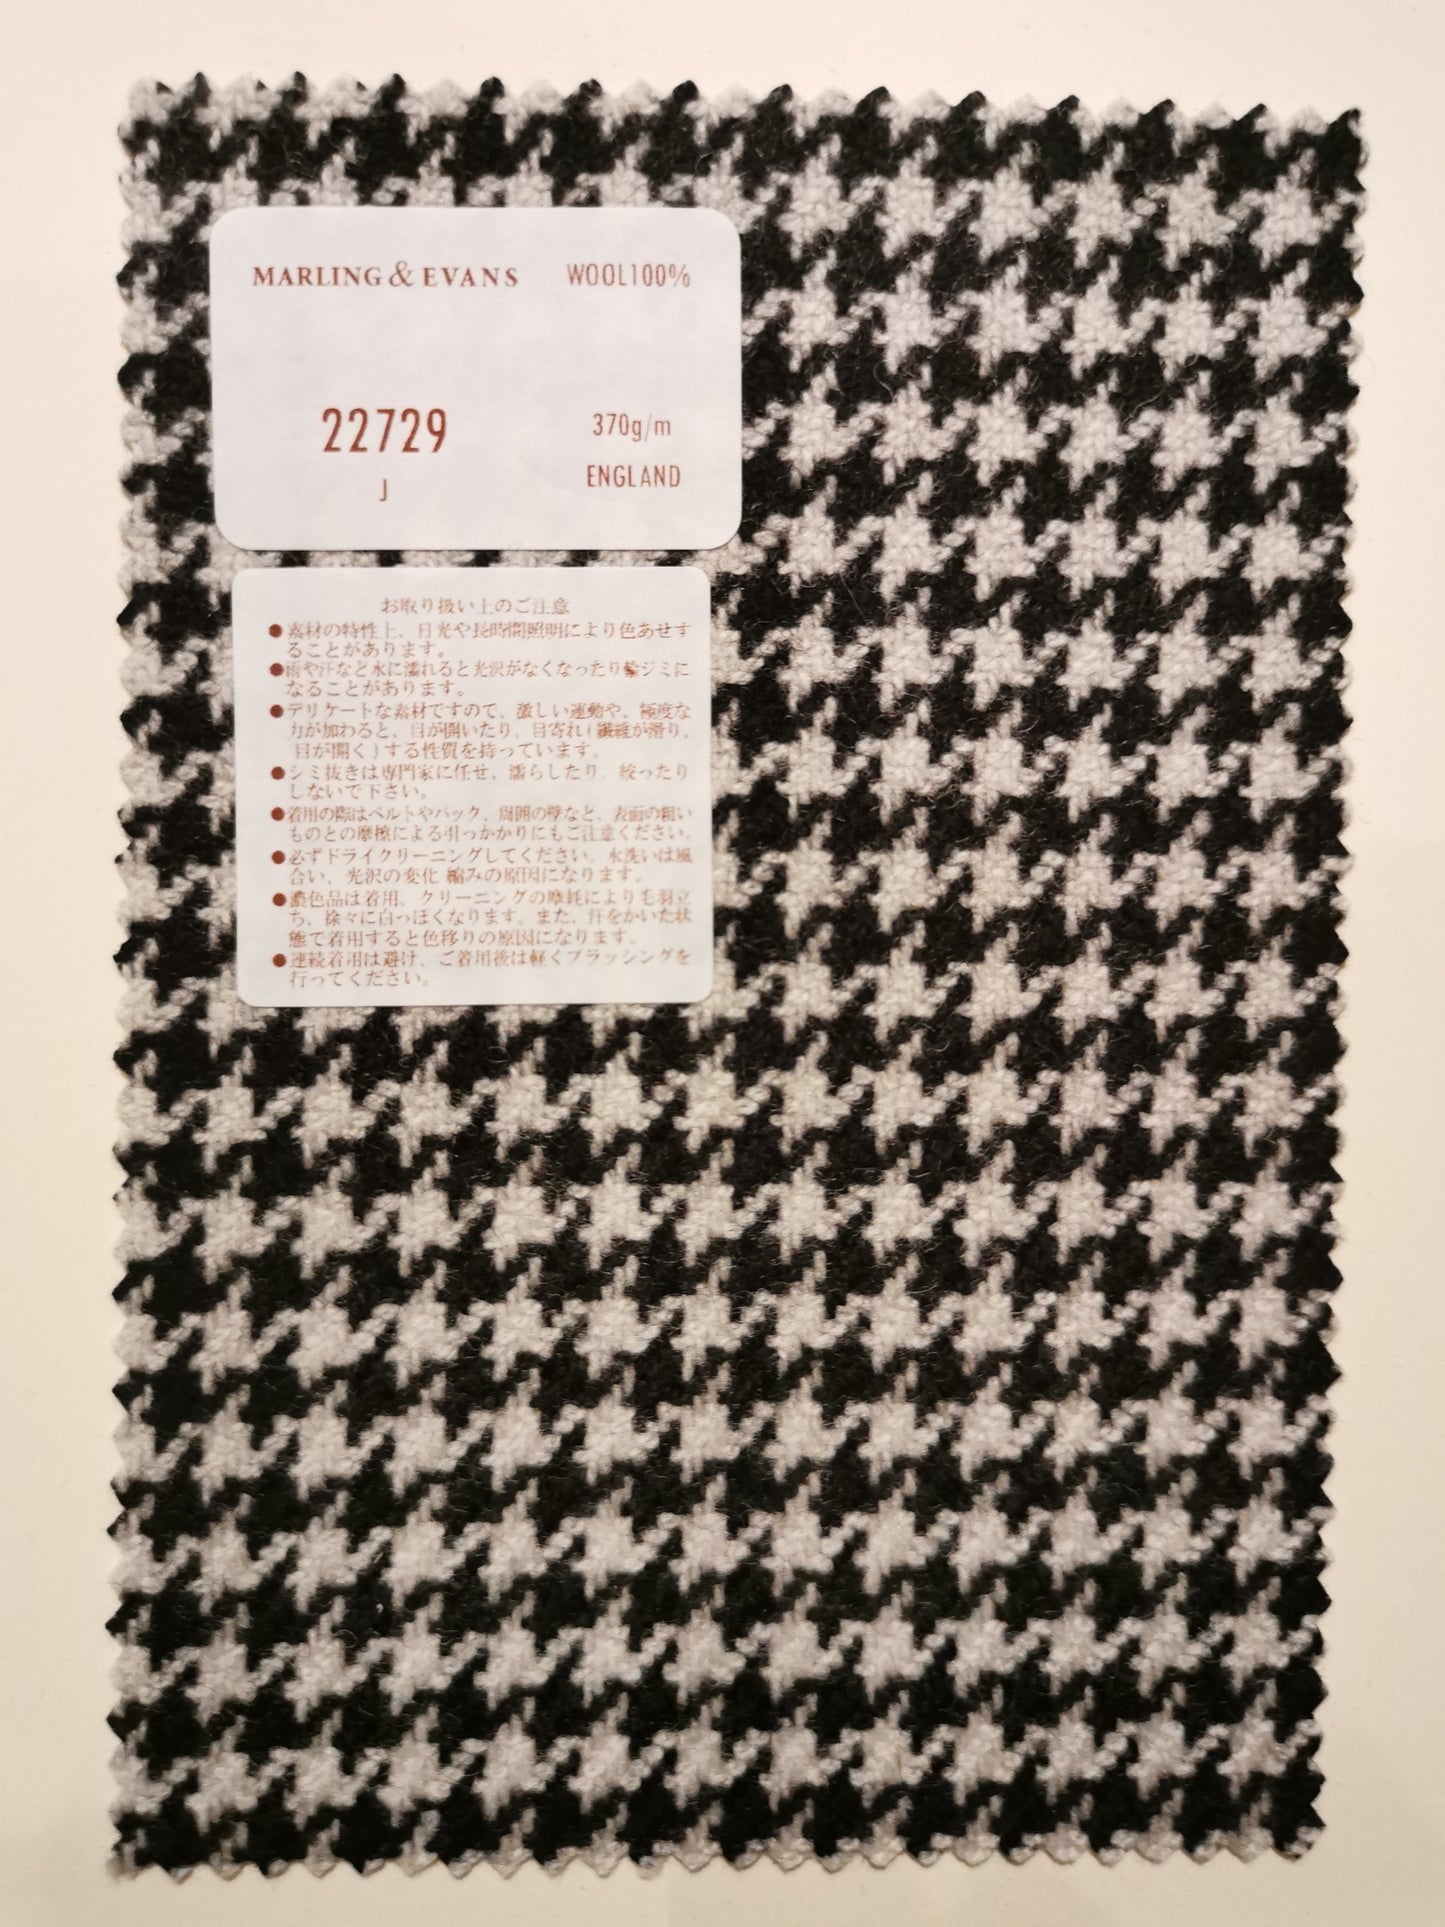 Brand : MARLING&EVANS Textile ID : 22729